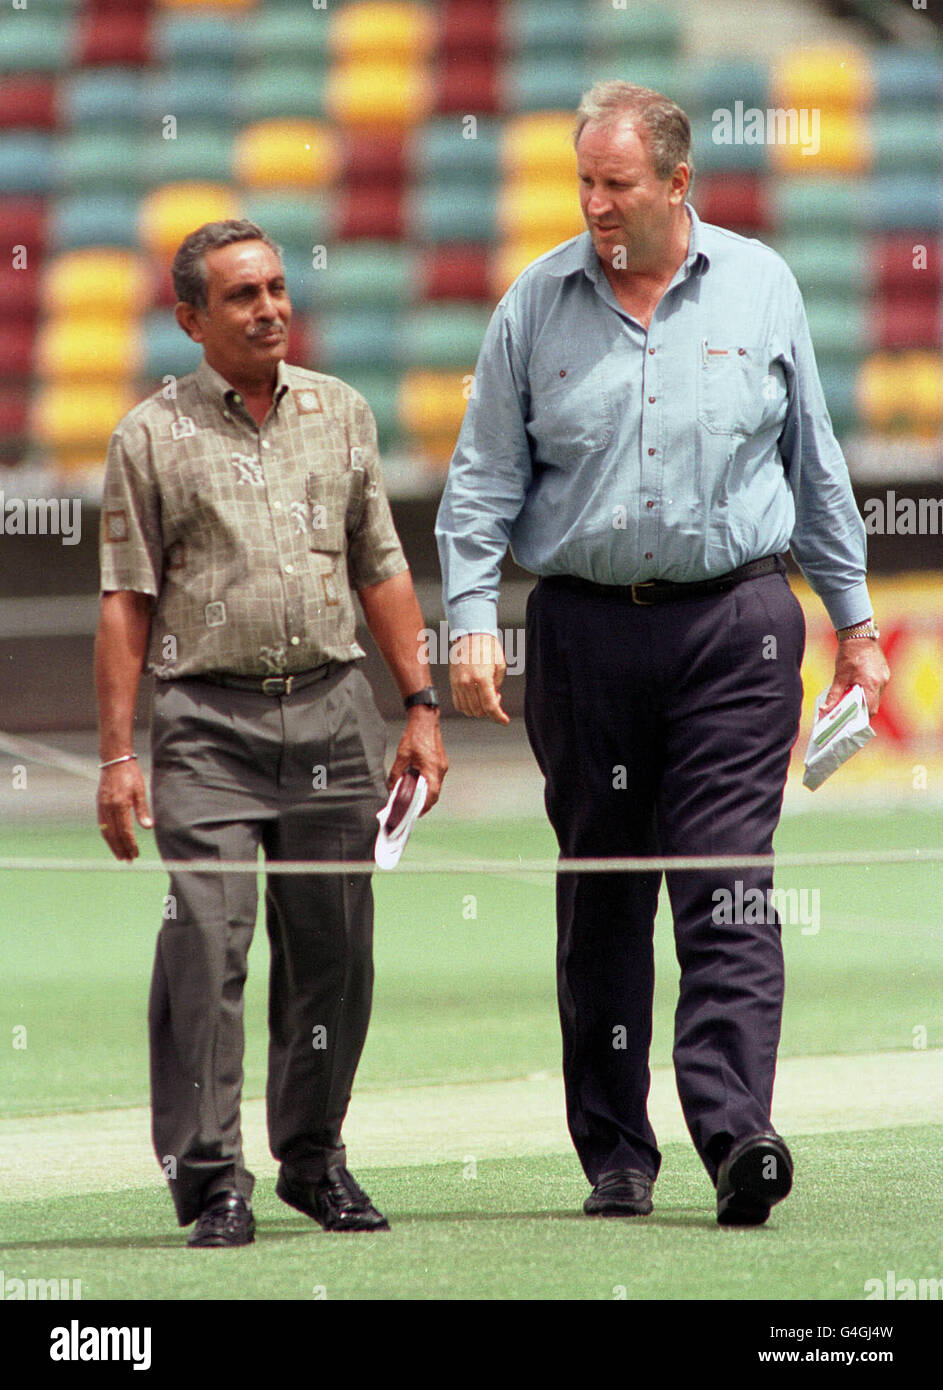 The two umpires for tomorrow's first Test, K T Francis of Sri Lanka (left) and Australia's Darrell Hair, take a look at the ground in Brisbane today (Thursday). Photo By BEN CURTIS/PA. Stock Photo